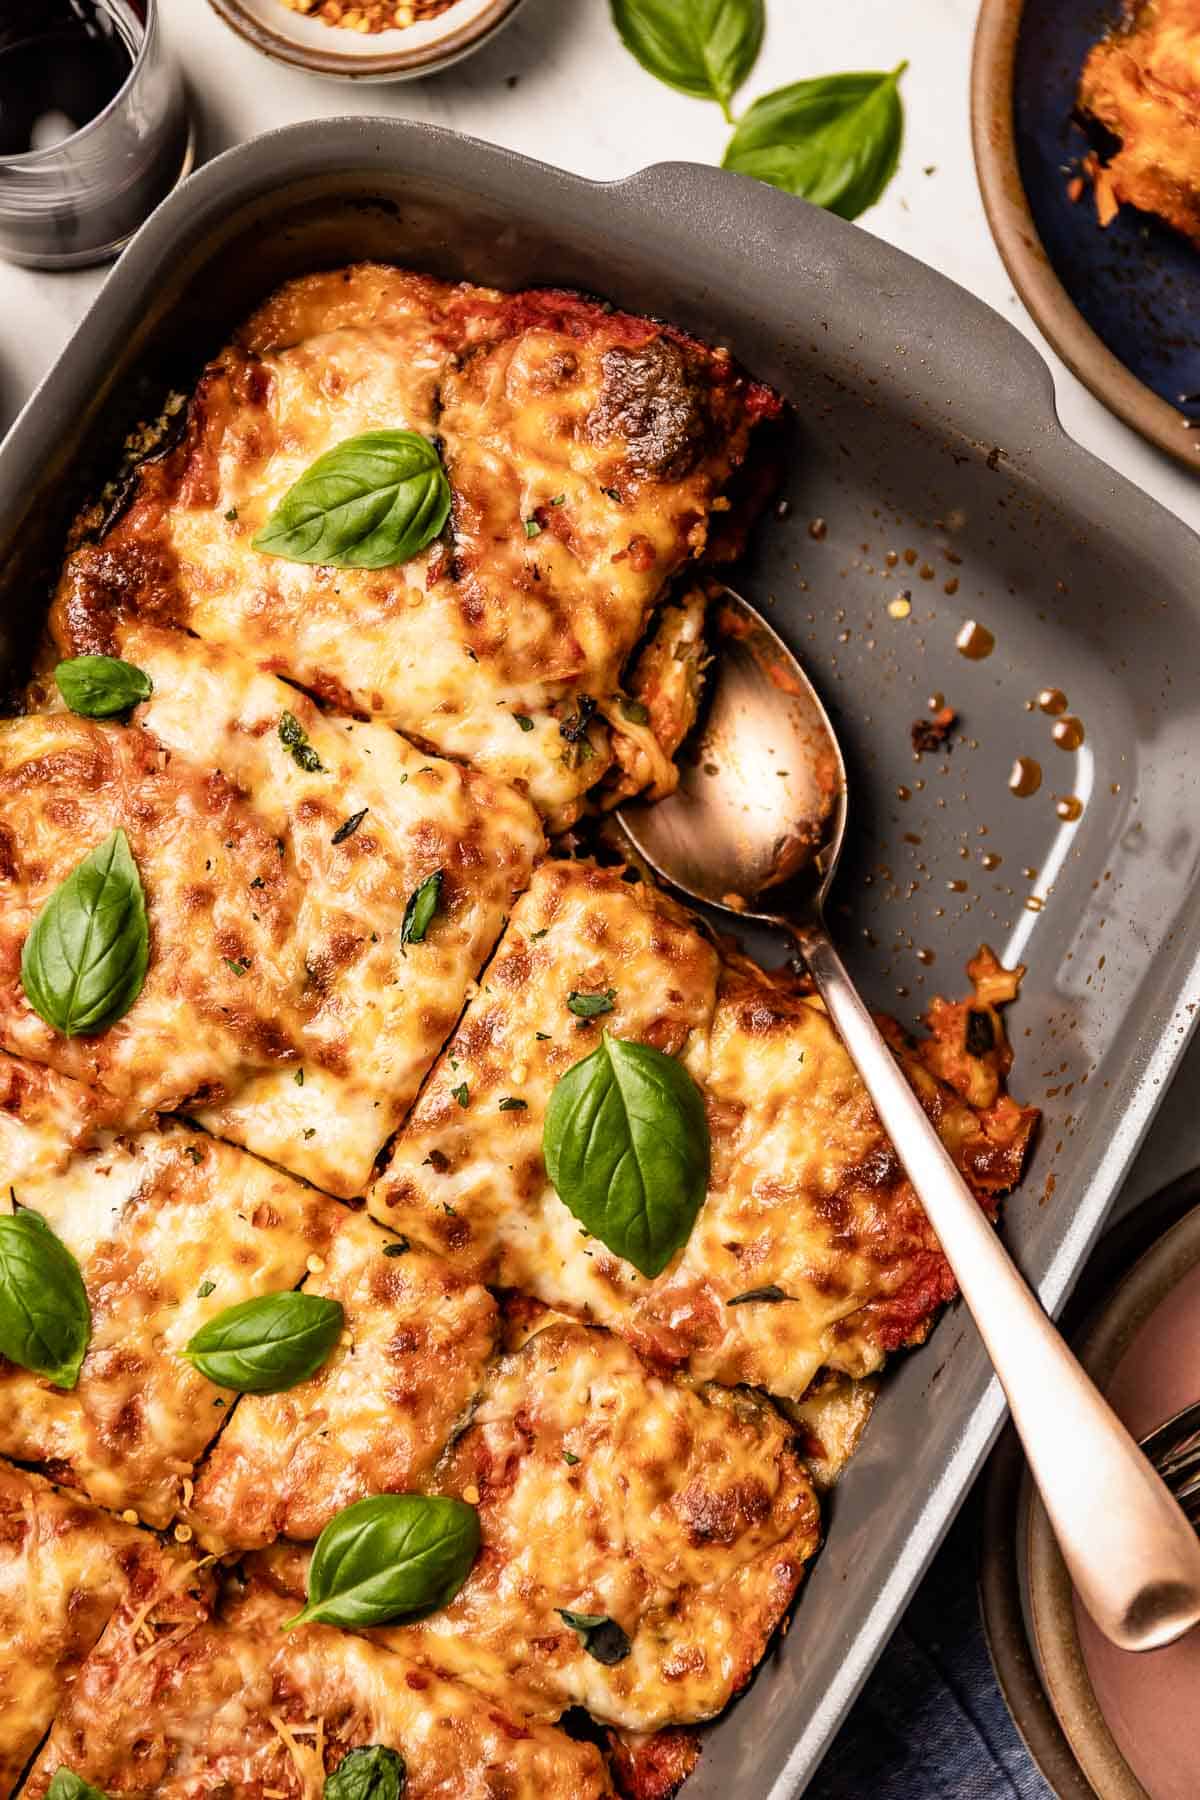 Baked eggplant parm topped with basil in a casserole dish from the top view.